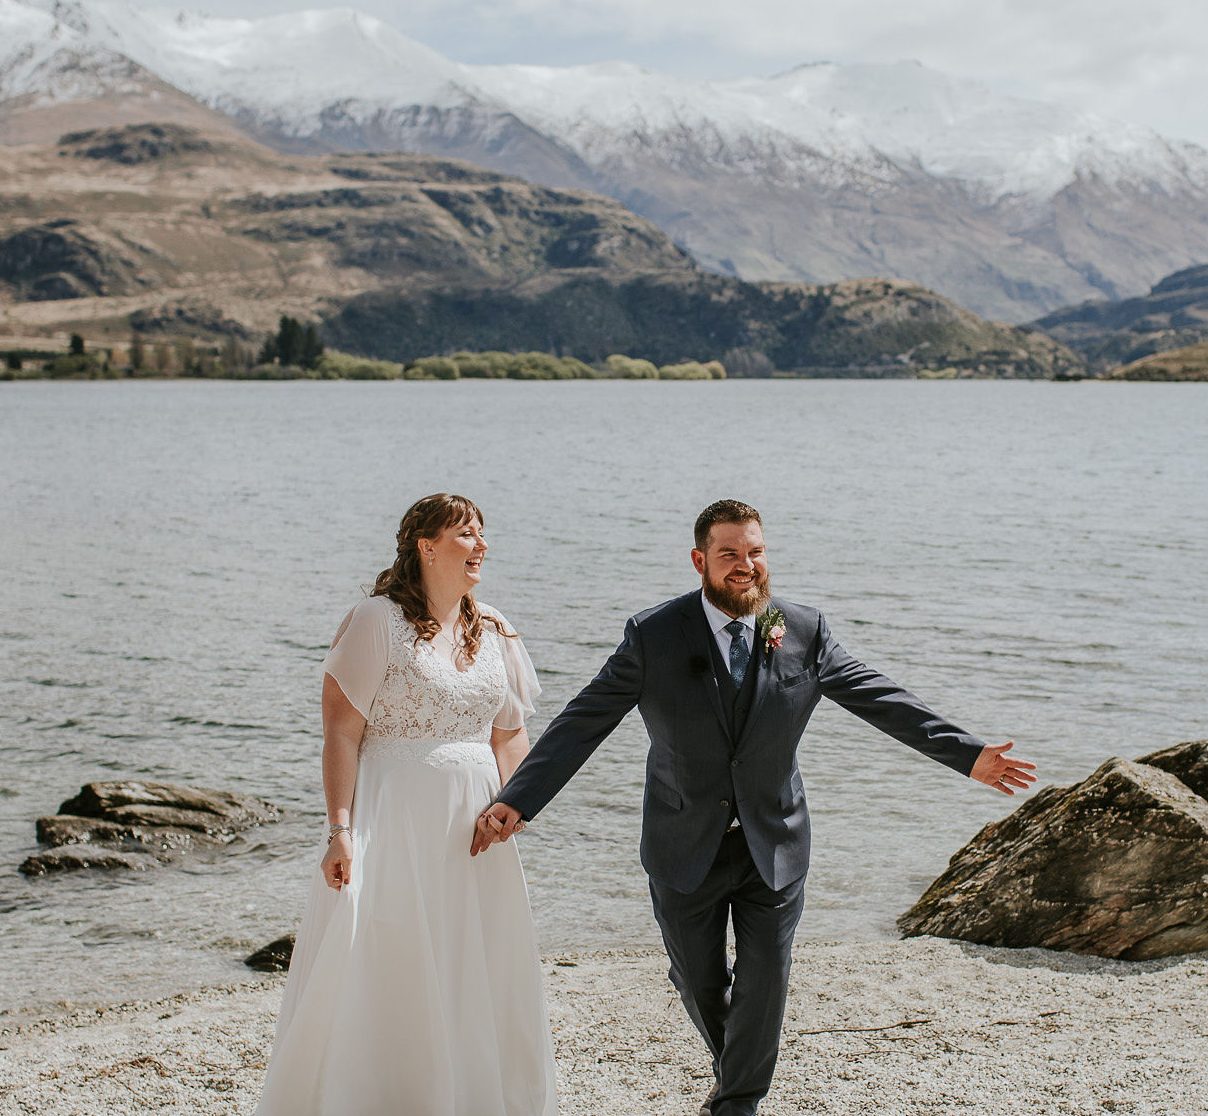 Wanaka small wedding at Glendhu Bay, wedding by Wanaka marriage celebrant, Siobhain the Celebrant, couple smiling and laughing taking a bow with Lake Wanaka in background and snow capped mountains